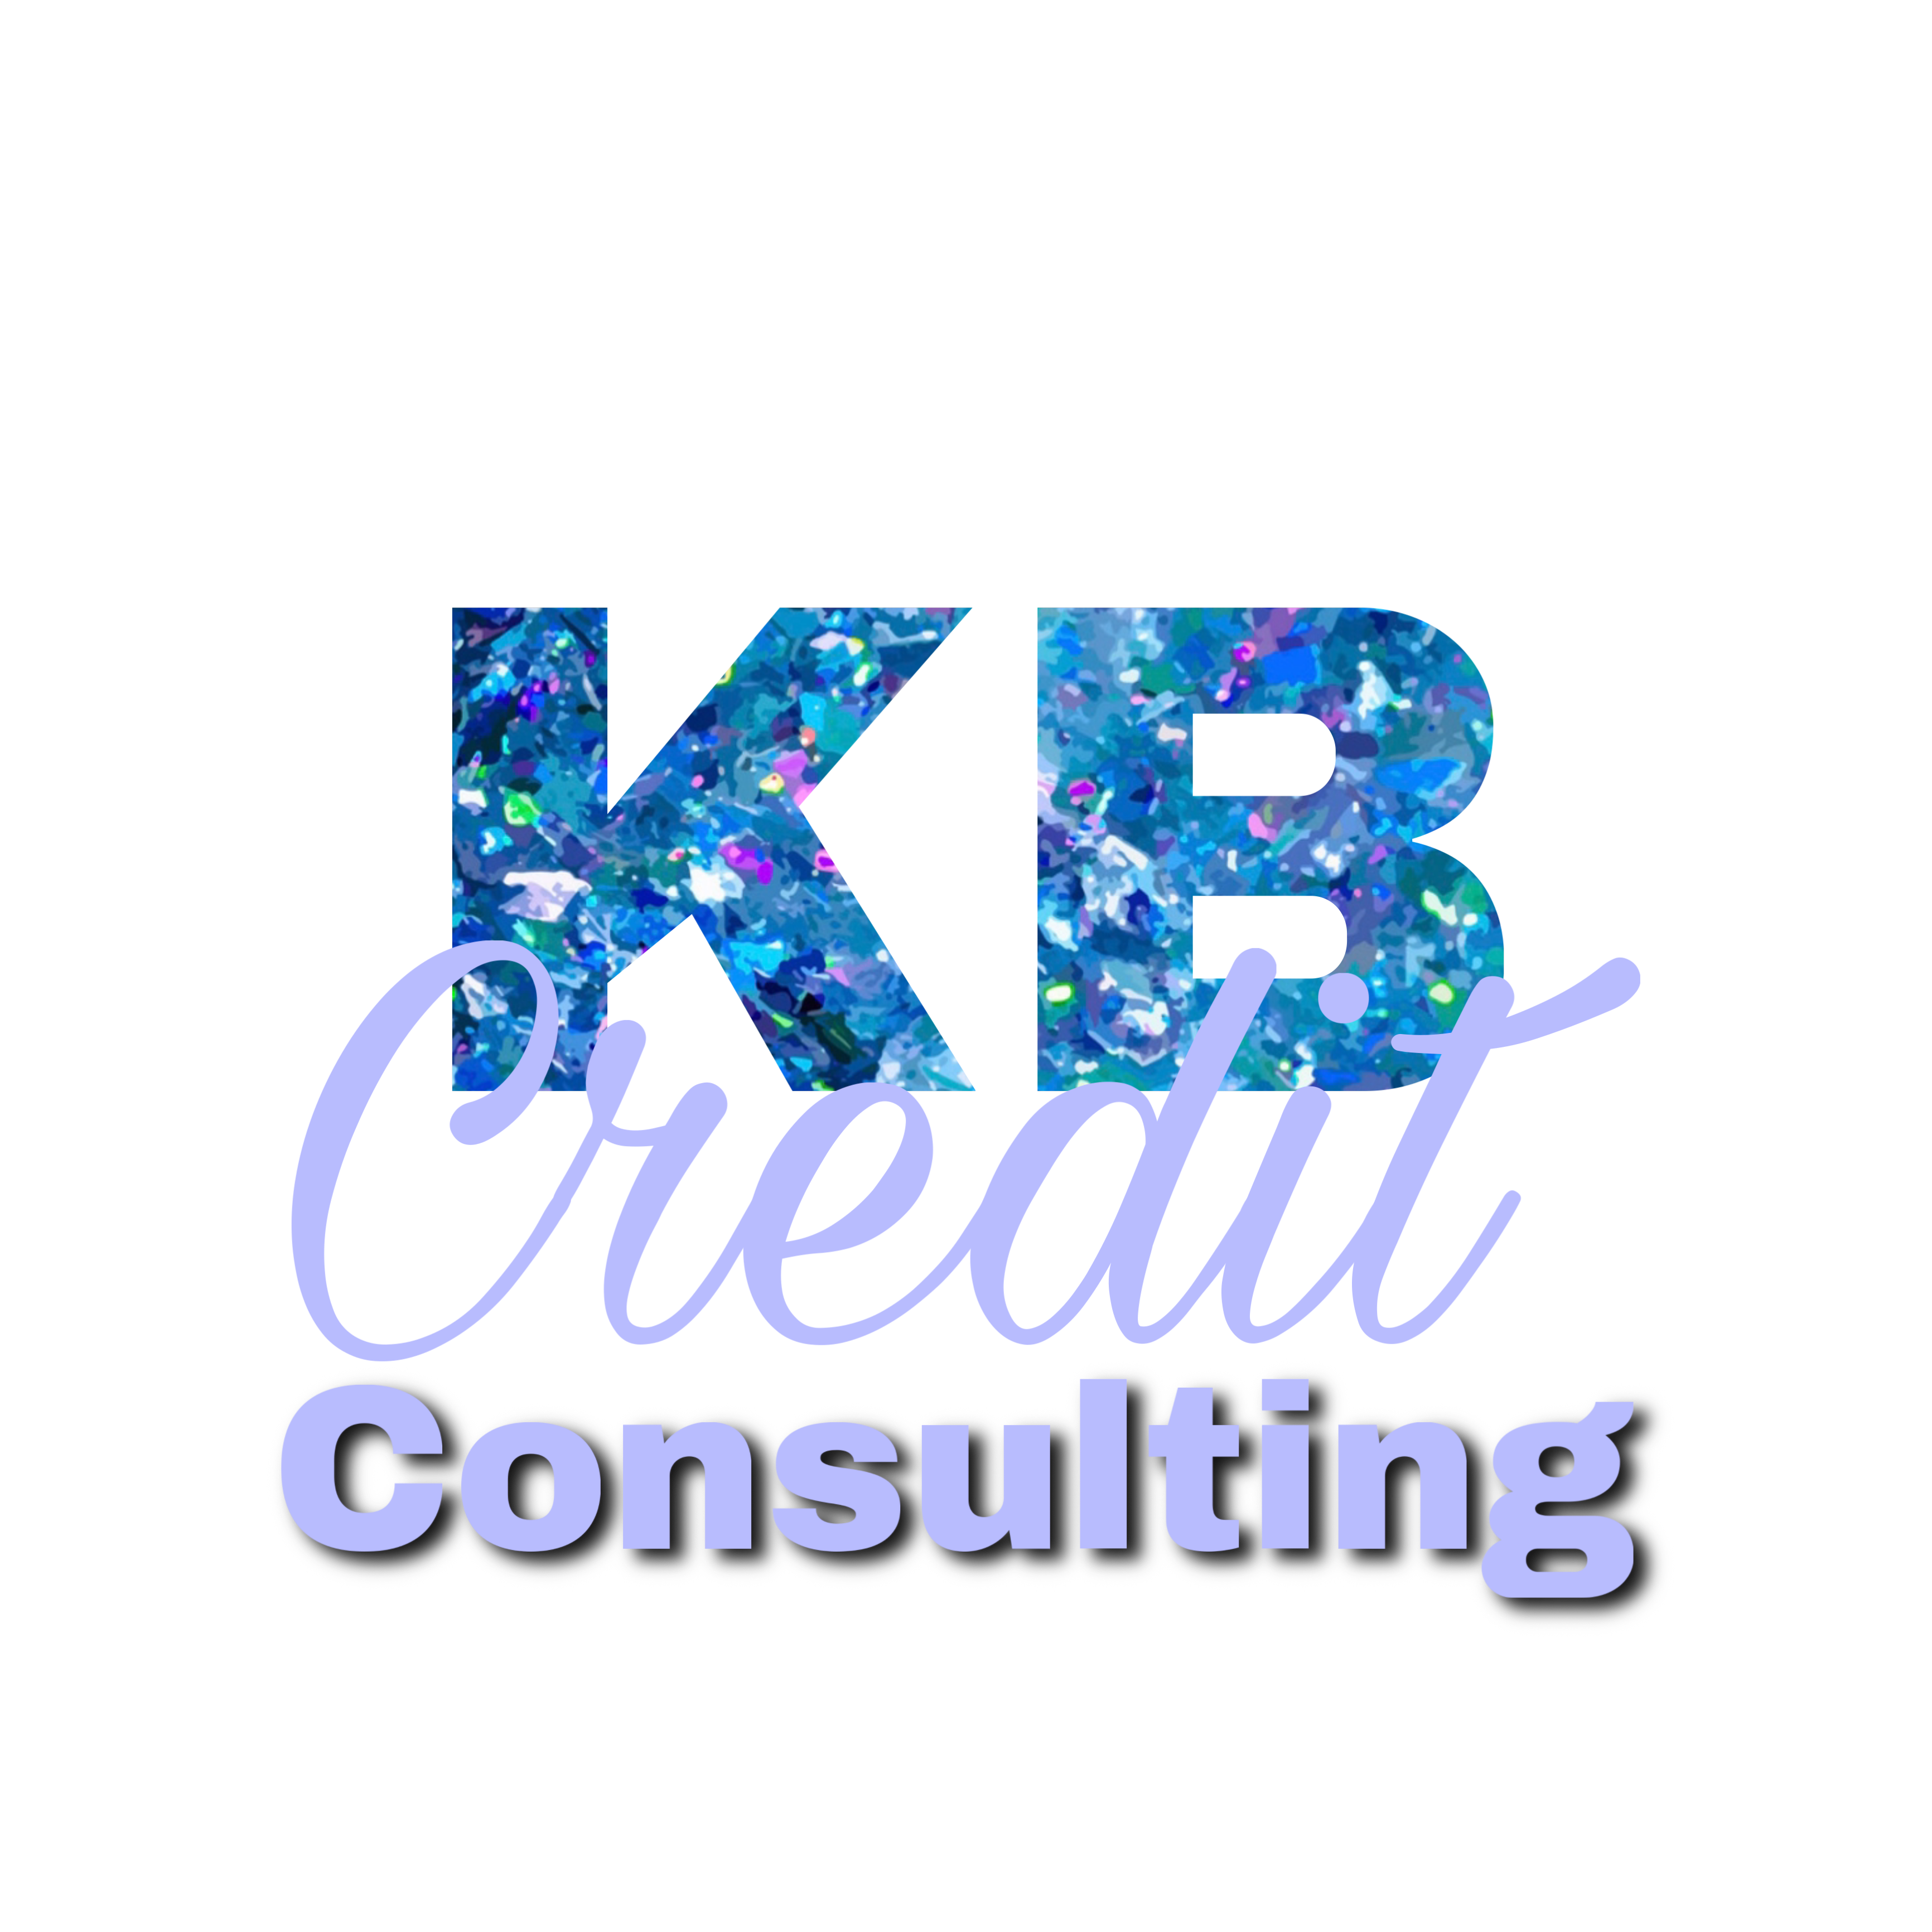 KB Credit Consulting